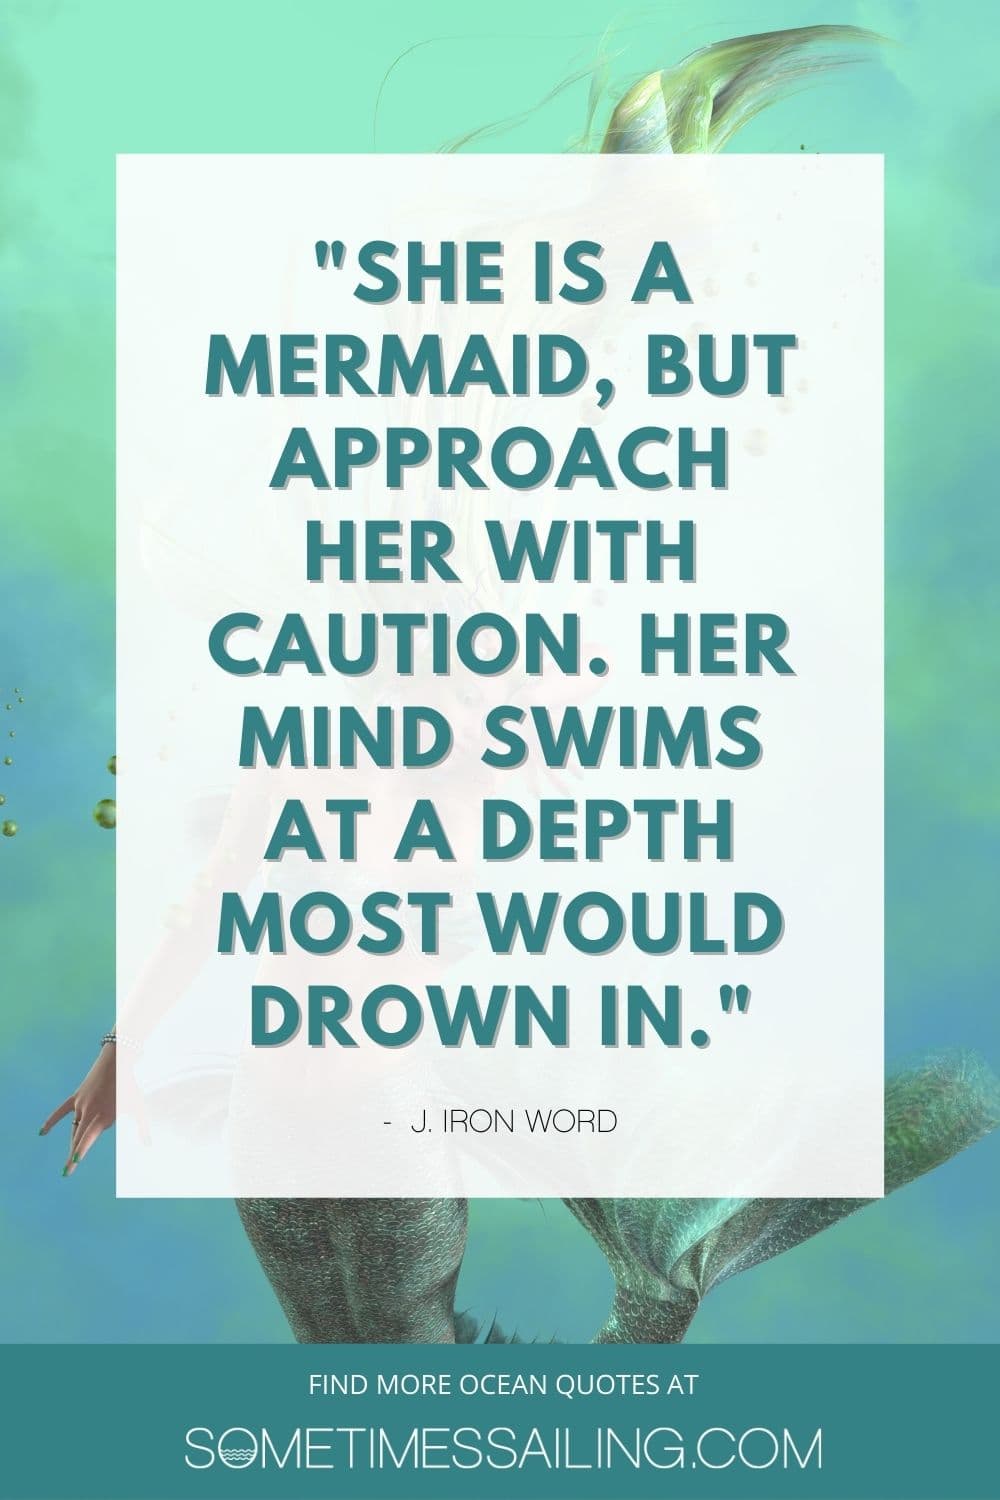 Inspirational ocean quote with a photo of a mermaid behind it.